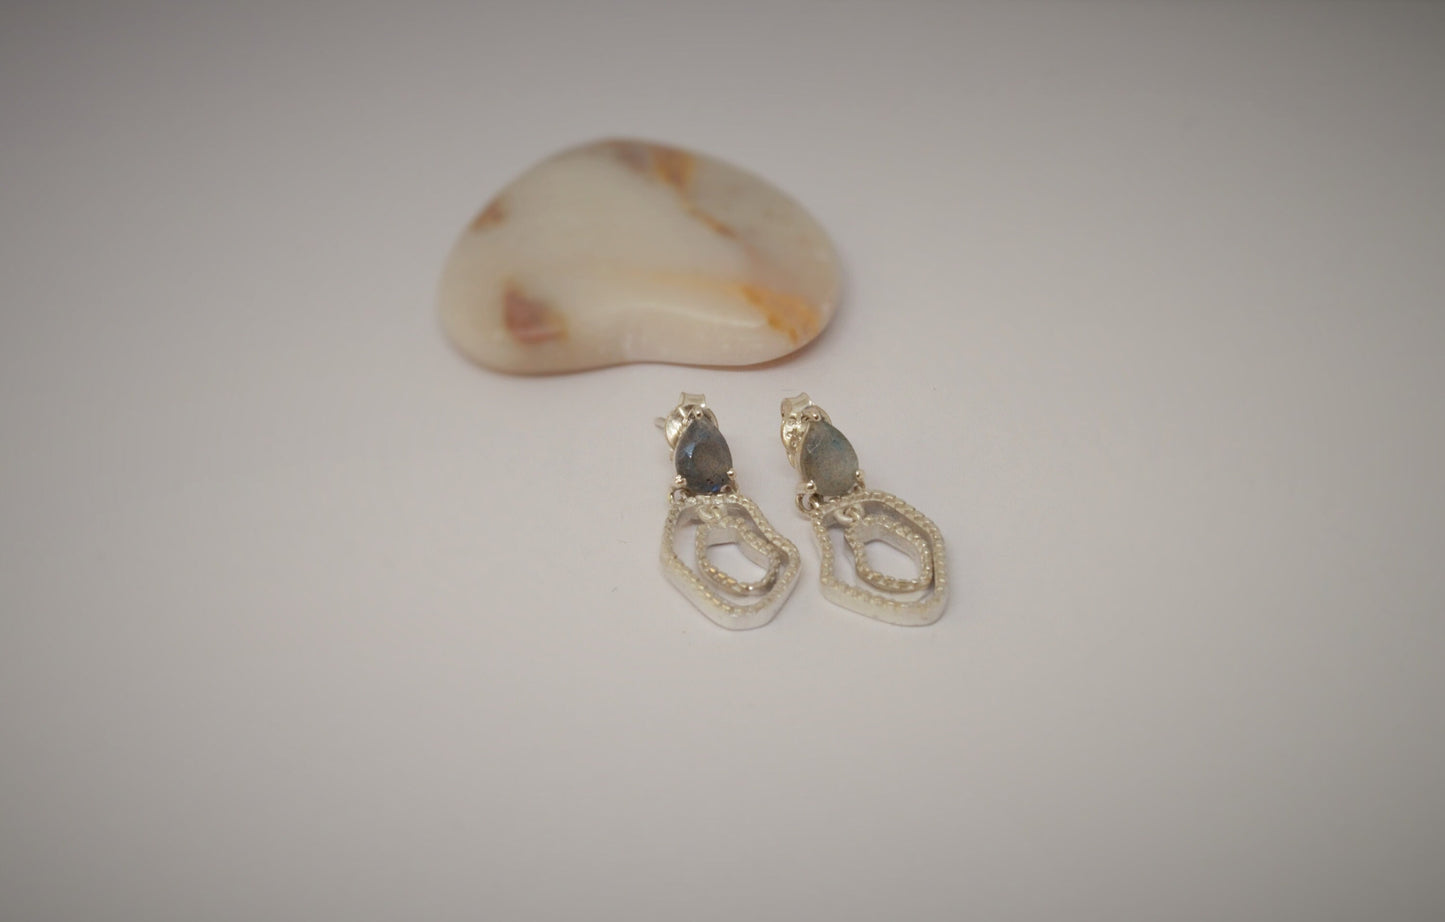 Labradorite Sterling Silver Earrings, Labradorite Jewelry, Unique Dainty Gemstone Statement Earrings, Birthday Gifts, Gifts for her